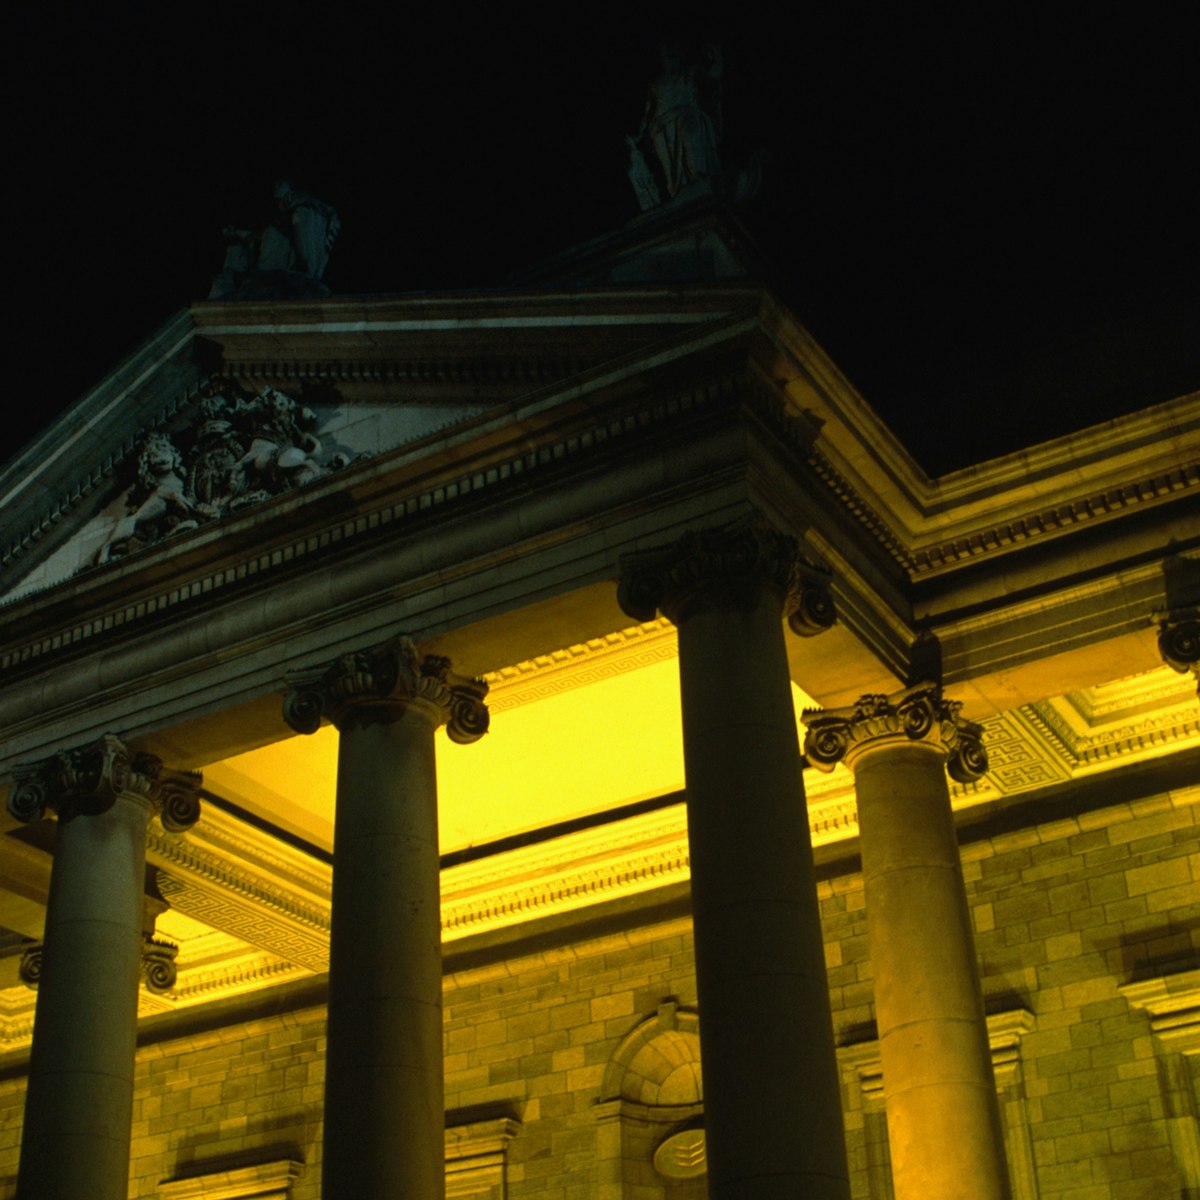 Bank of Ireland 19th century building on College Green at night.